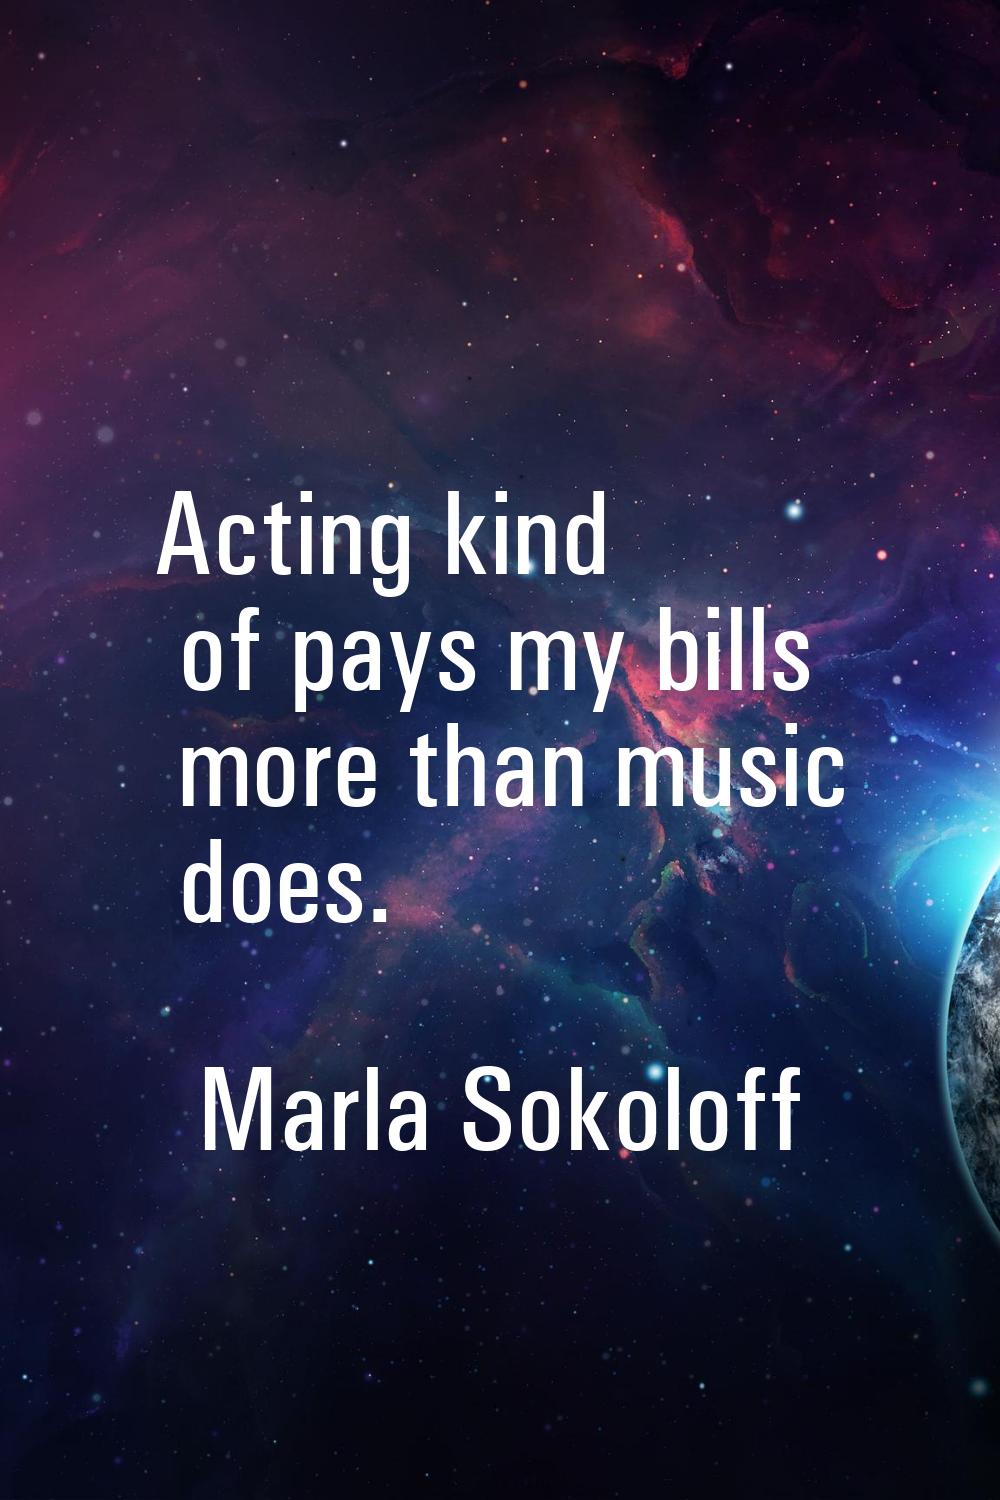 Acting kind of pays my bills more than music does.